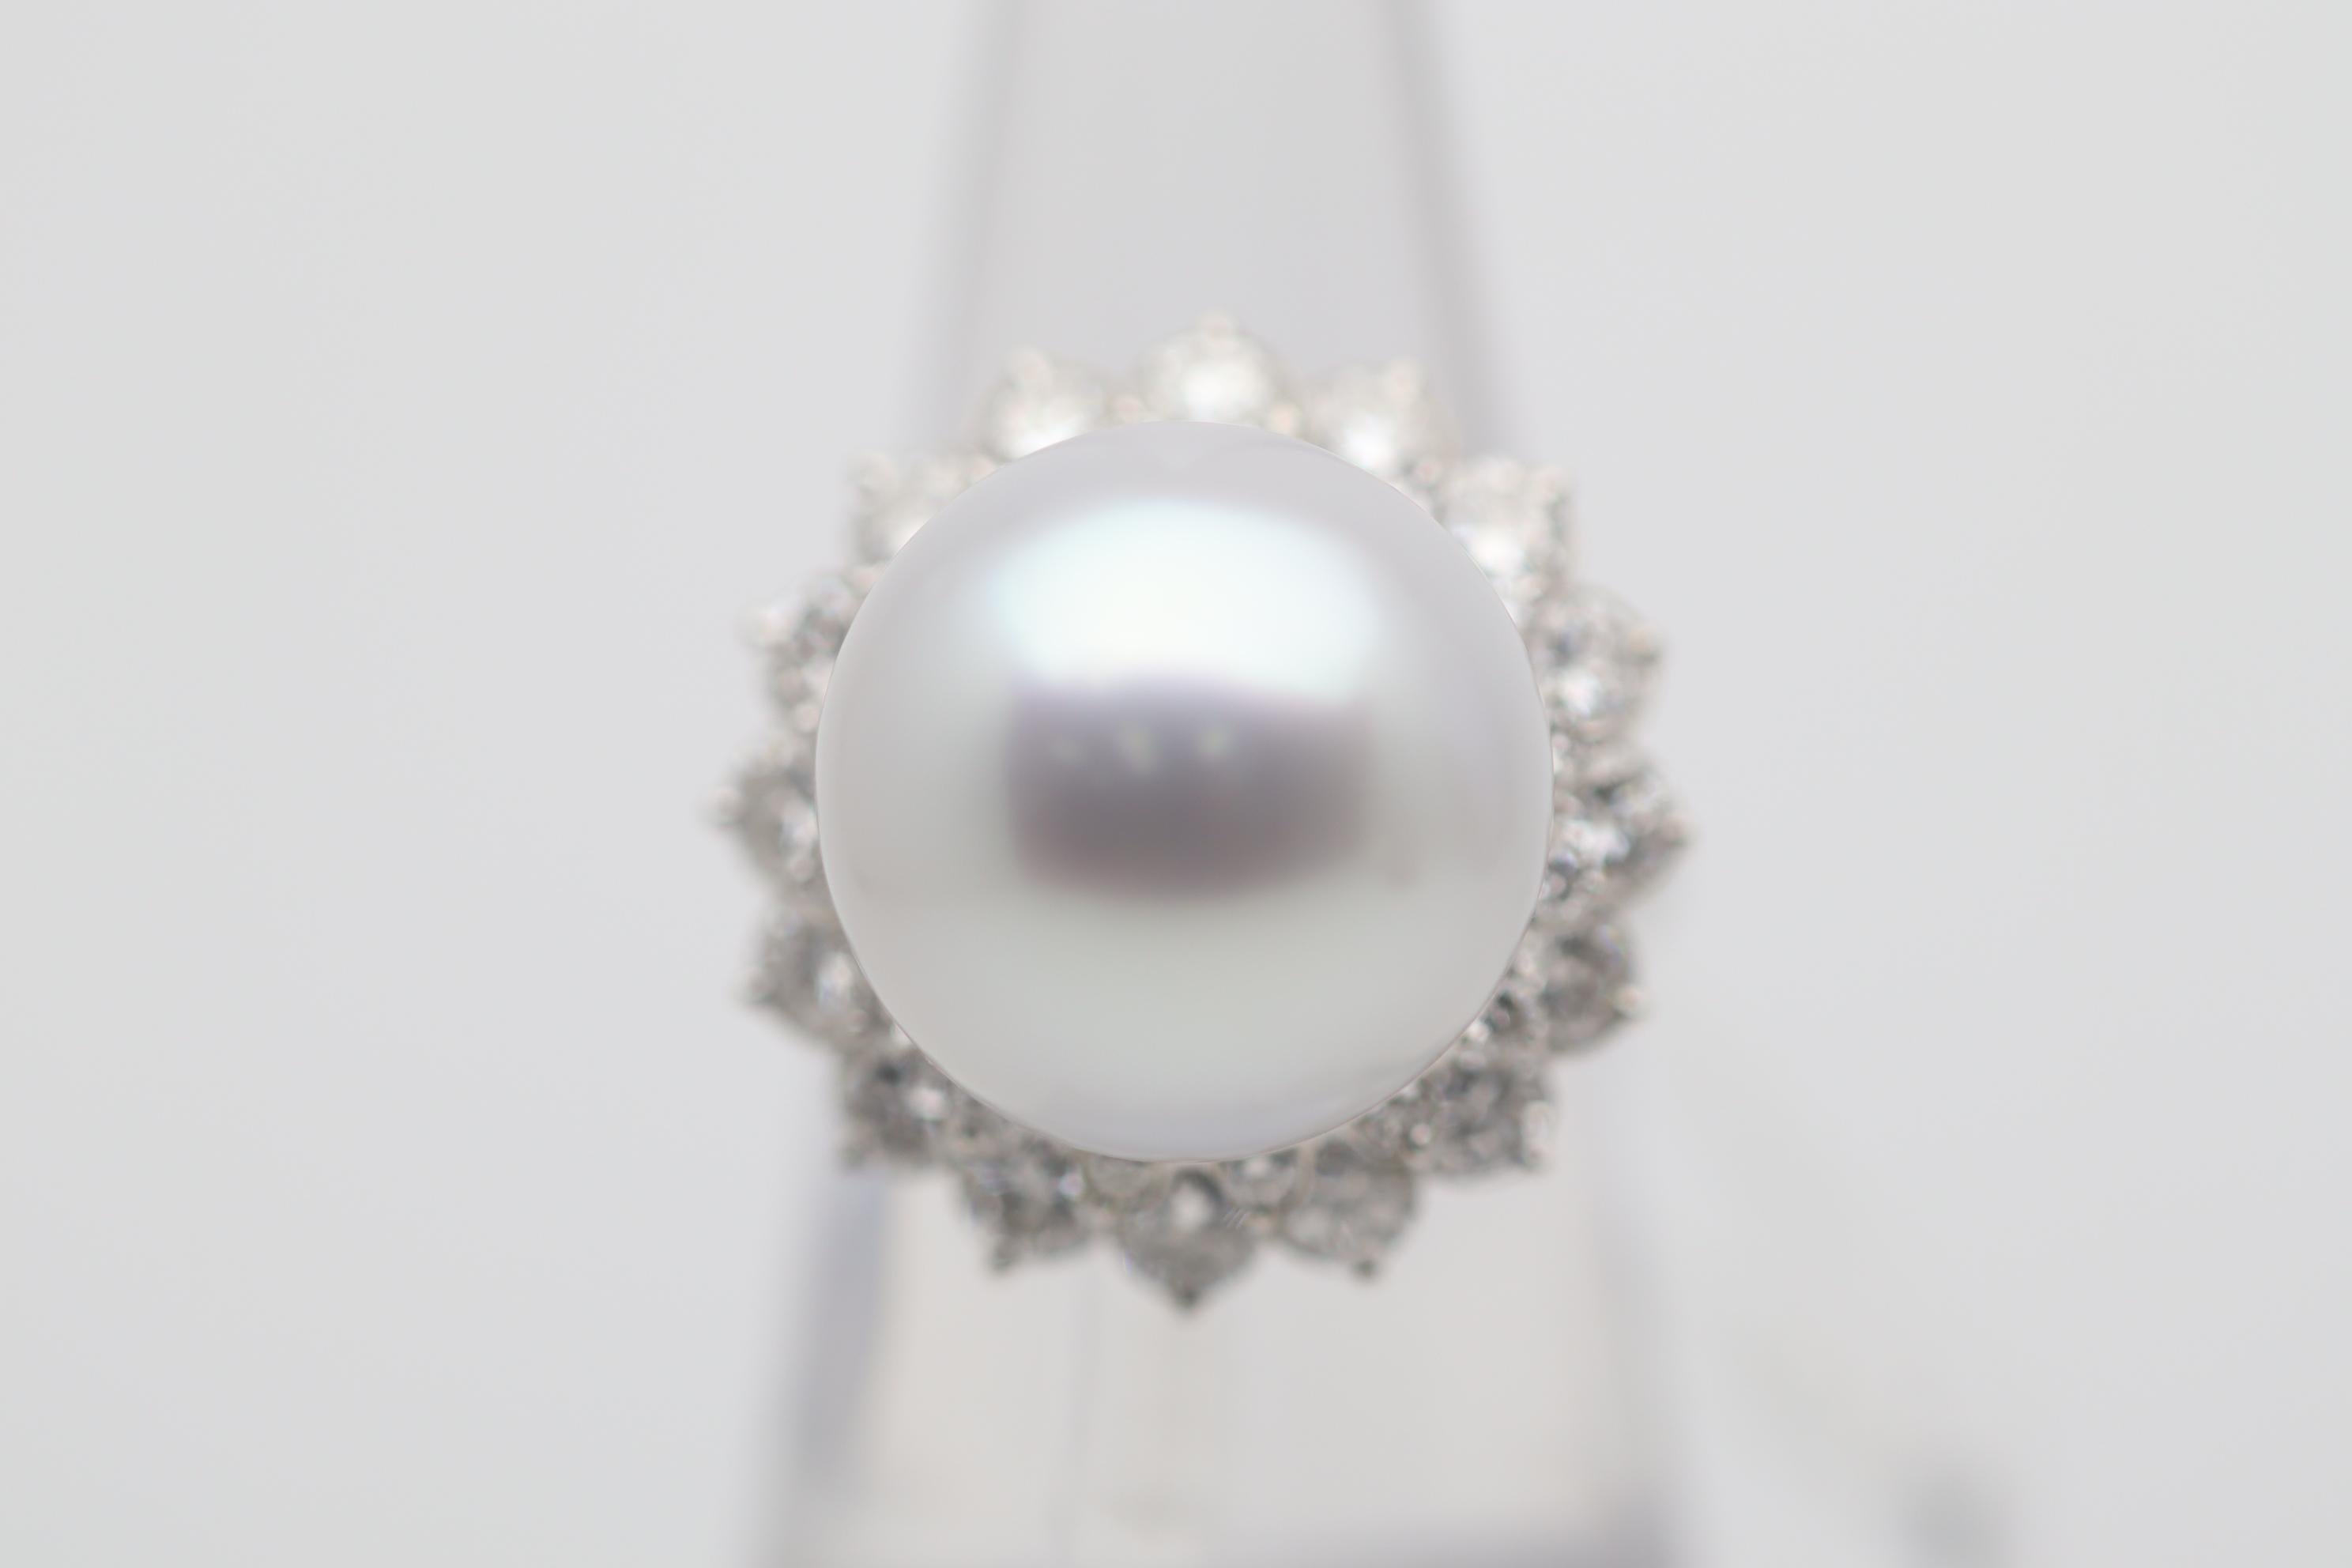 A large and impressive 16mm south sea cultured pearl takes center stage! Not only does it have a very large impressive size, but the quality is very fine as well. The pearl is perfectly round with great naker, strong luster, and a soft pink/gray